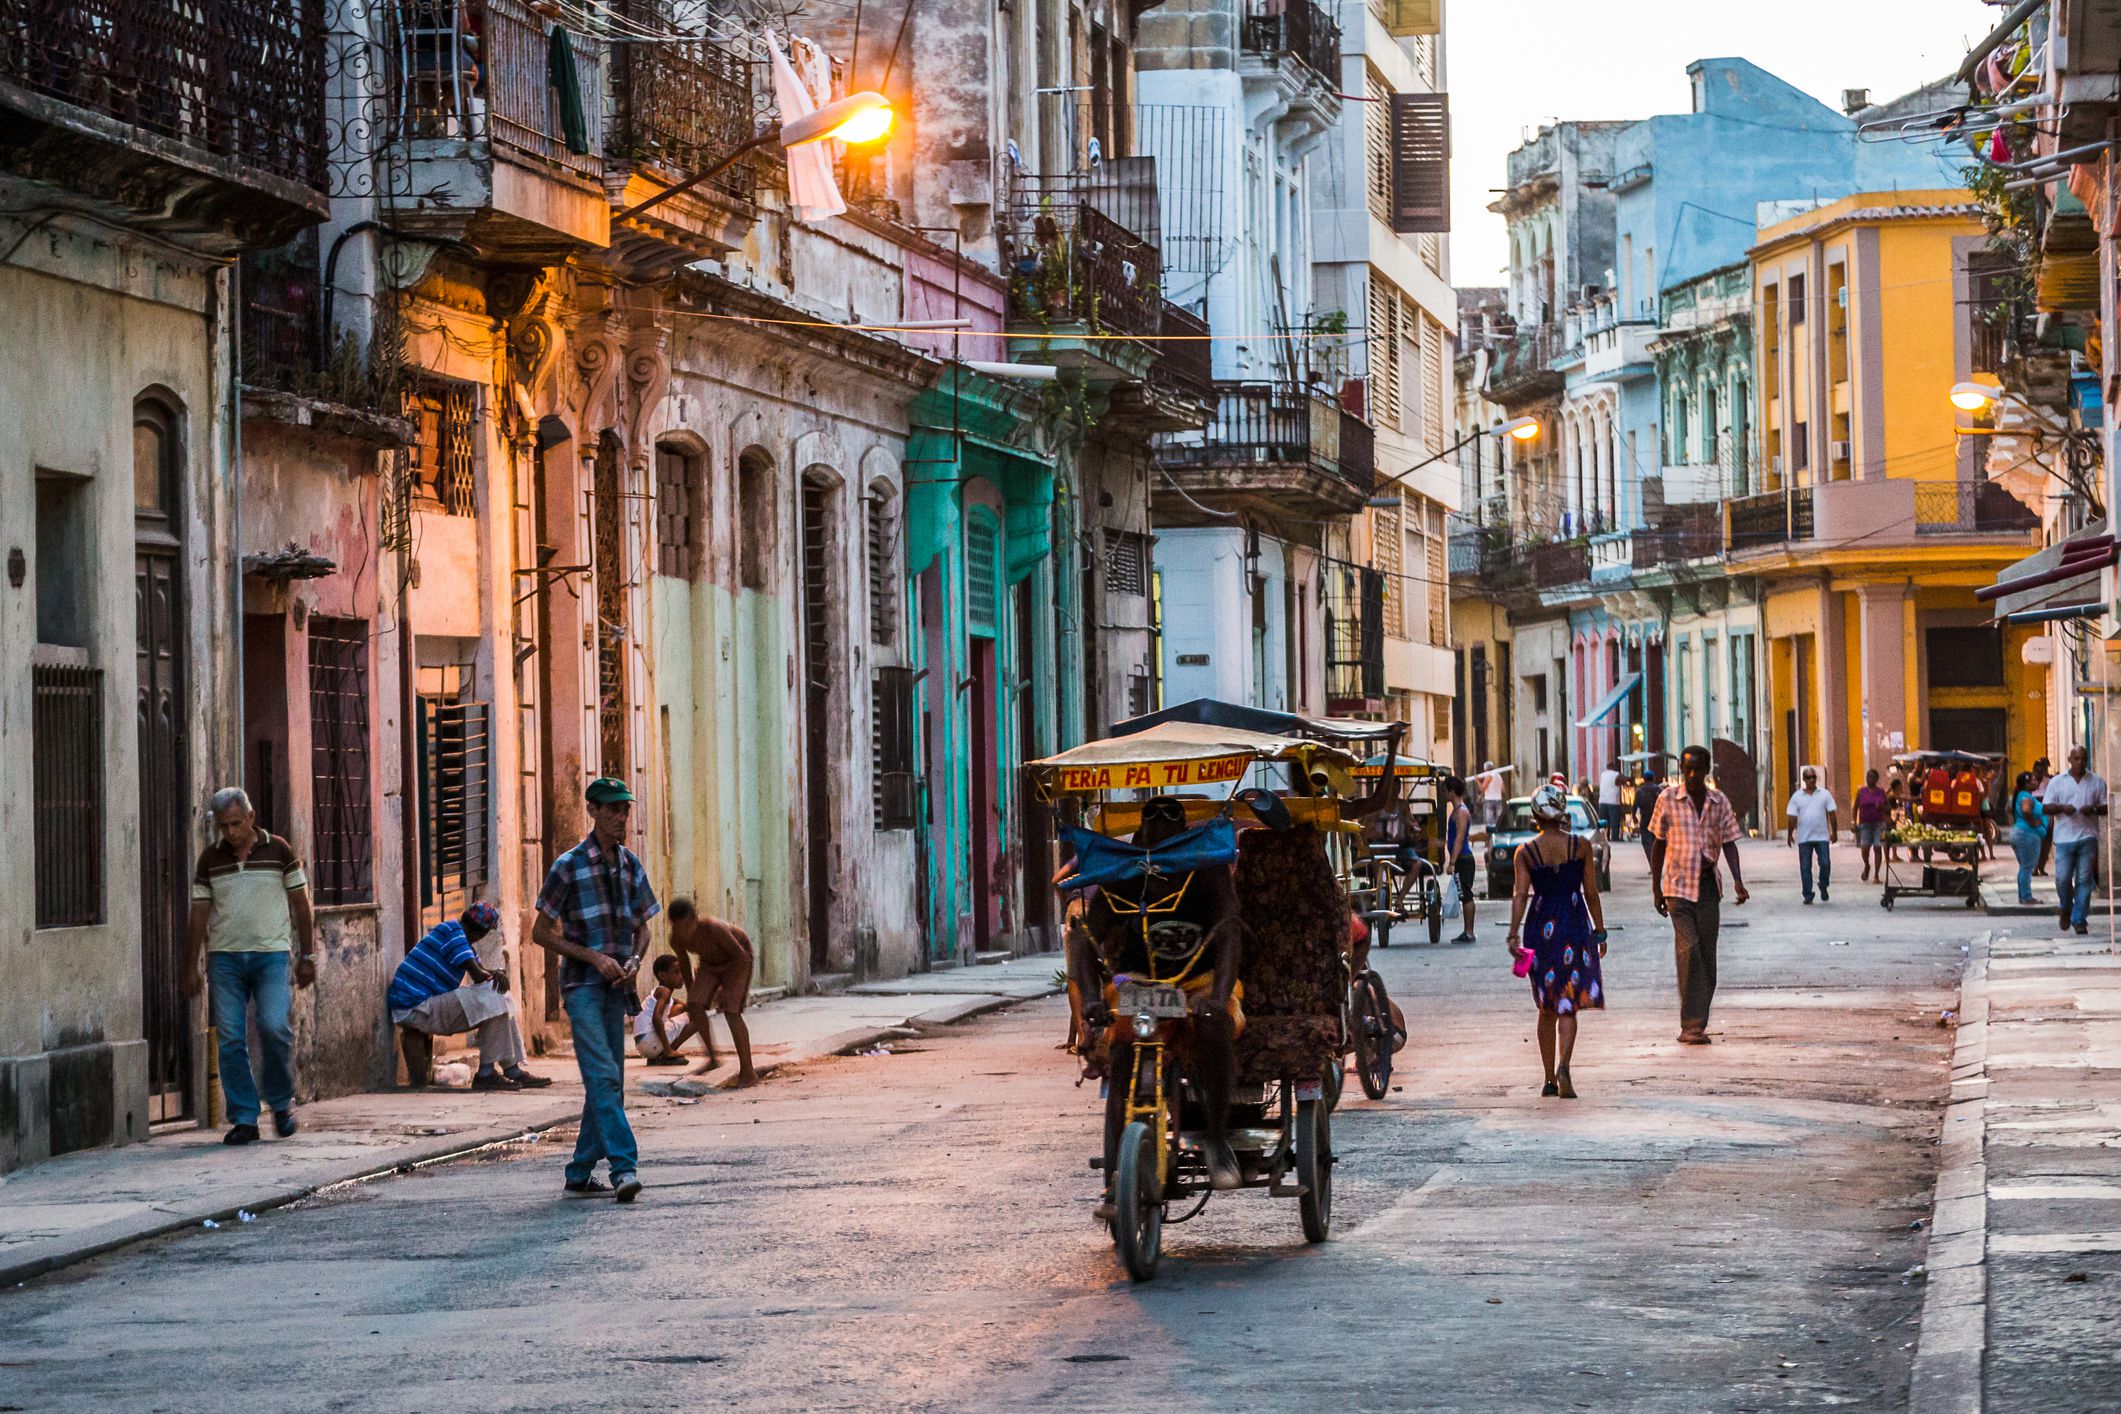 How to Travel to Cuba If You Are an American